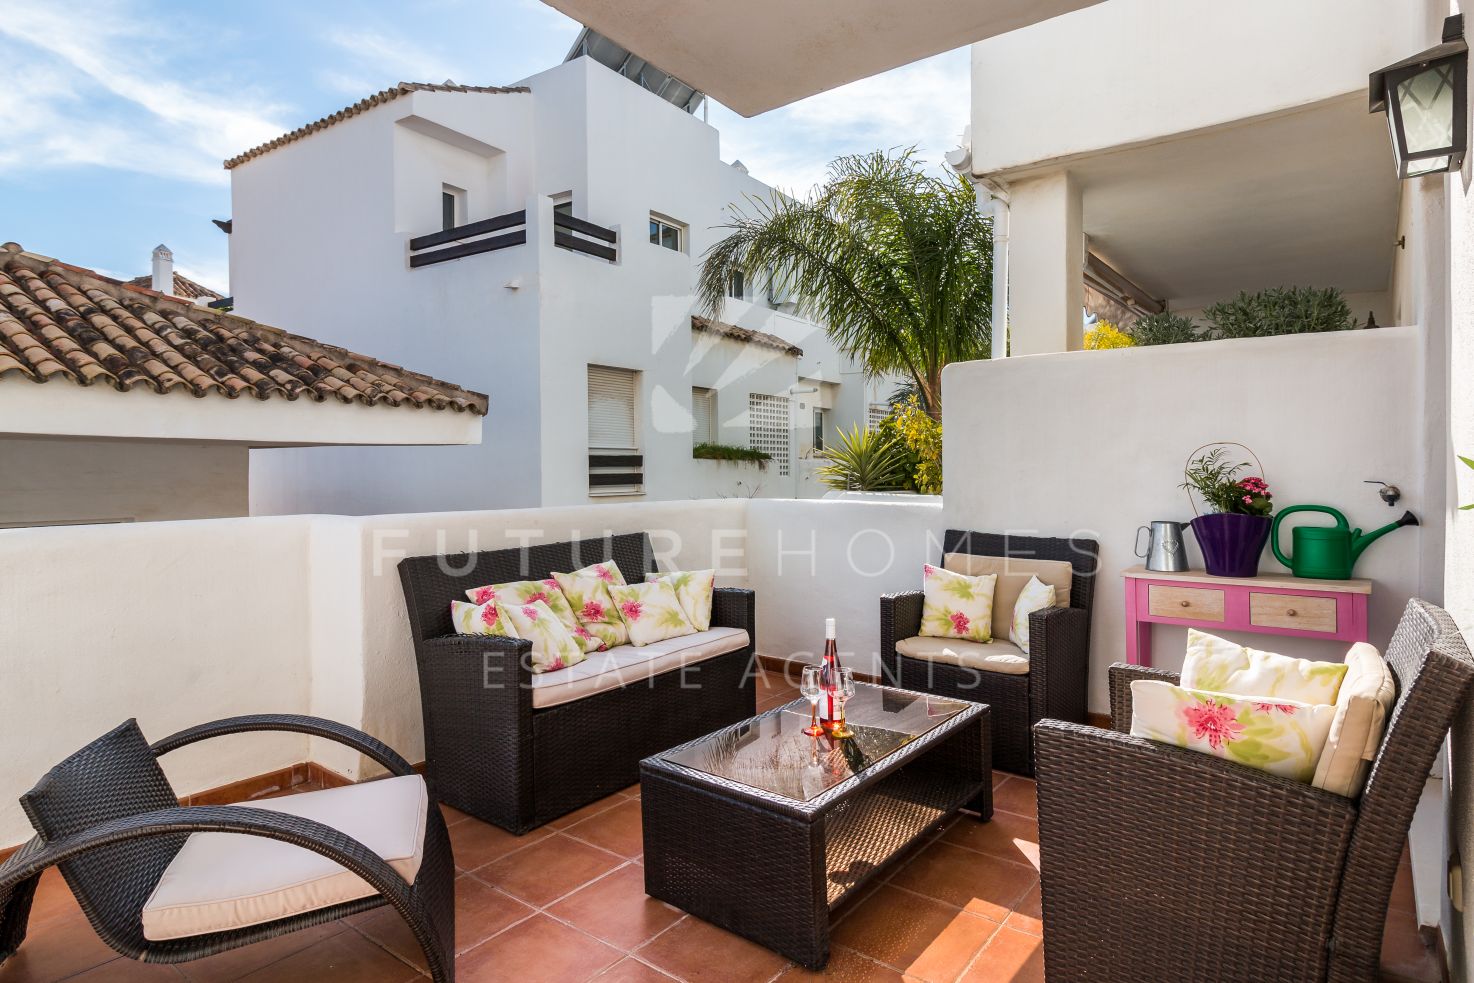 Modern apartment in Valle Romano, 5 min drive from Estepona port!